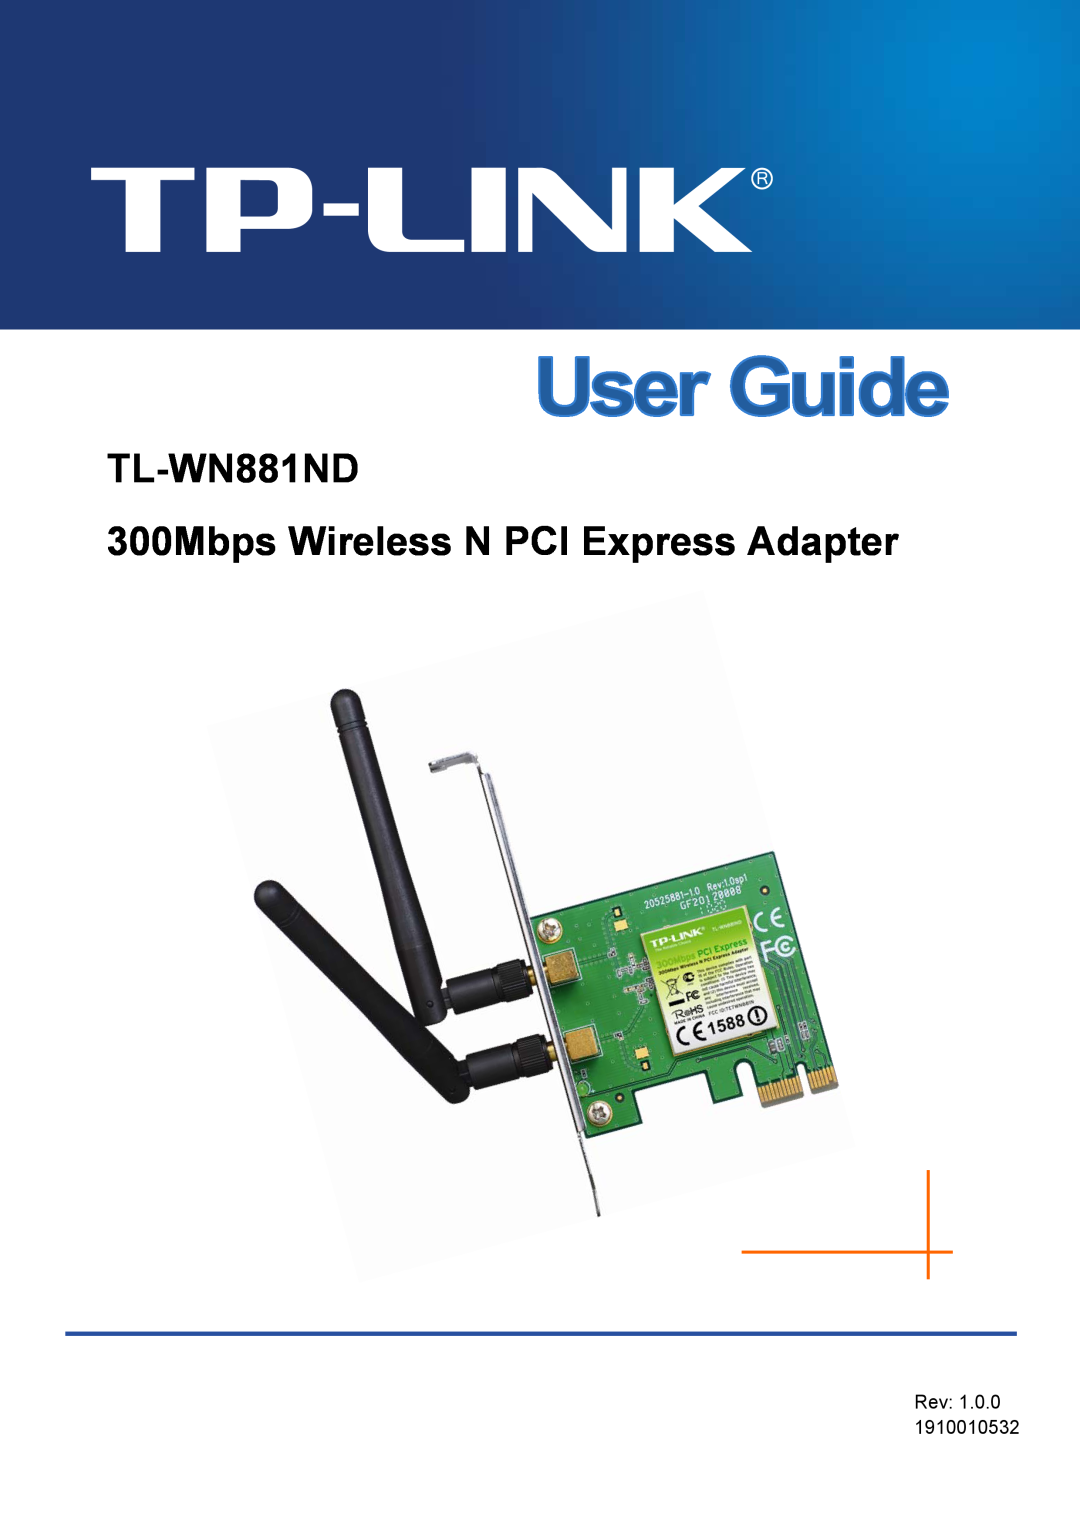 TP-Link manual TL-WN881ND 300Mbps Wireless N PCI Express Adapter, Rev 